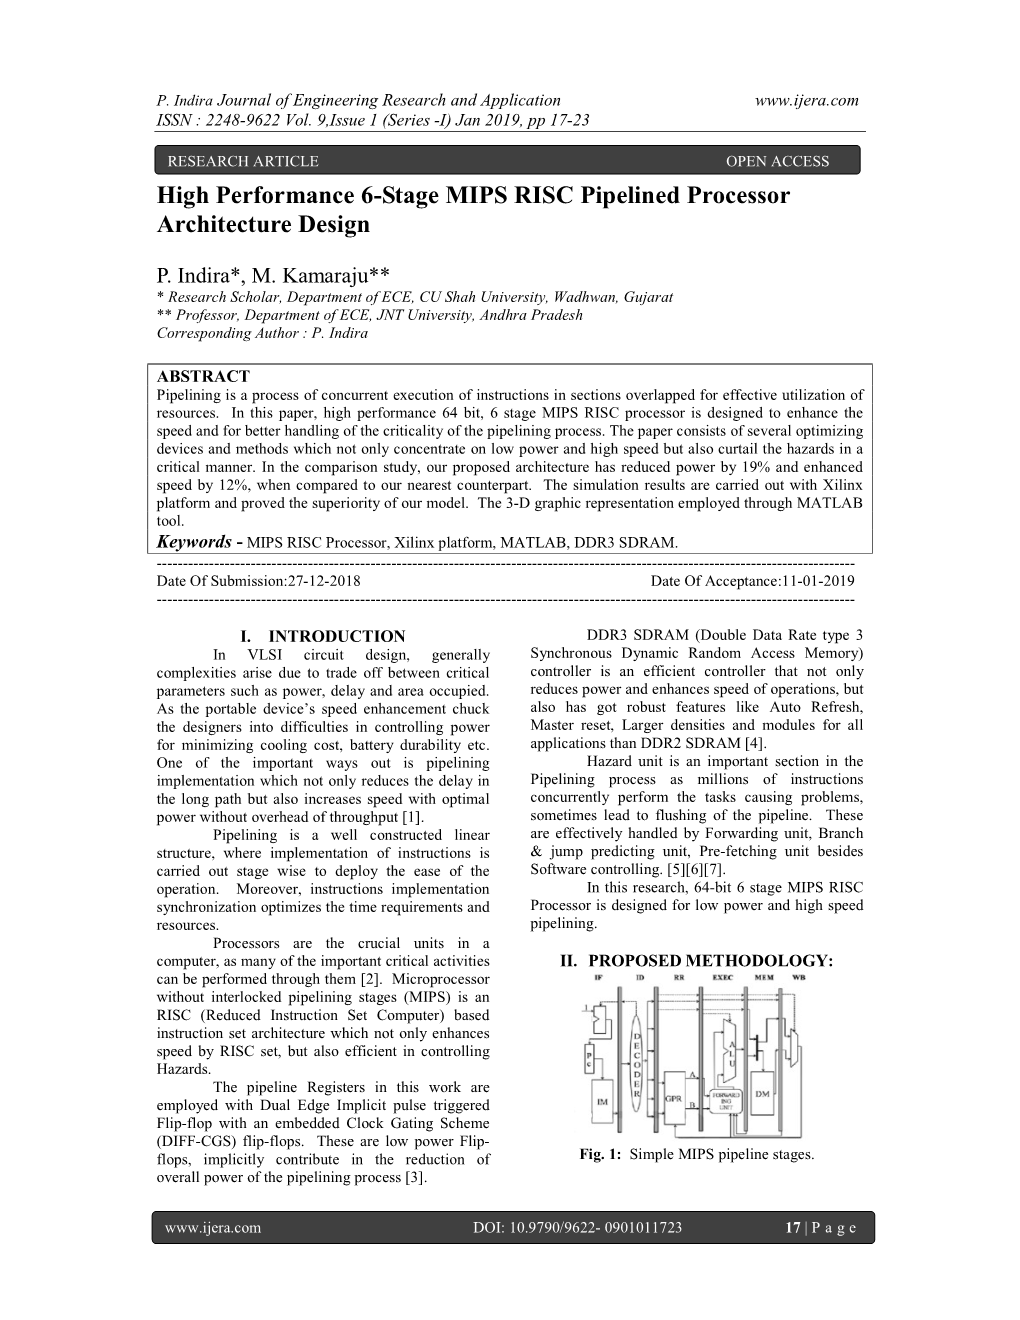 High Performance 6-Stage MIPS RISC Pipelined Processor Architecture Design